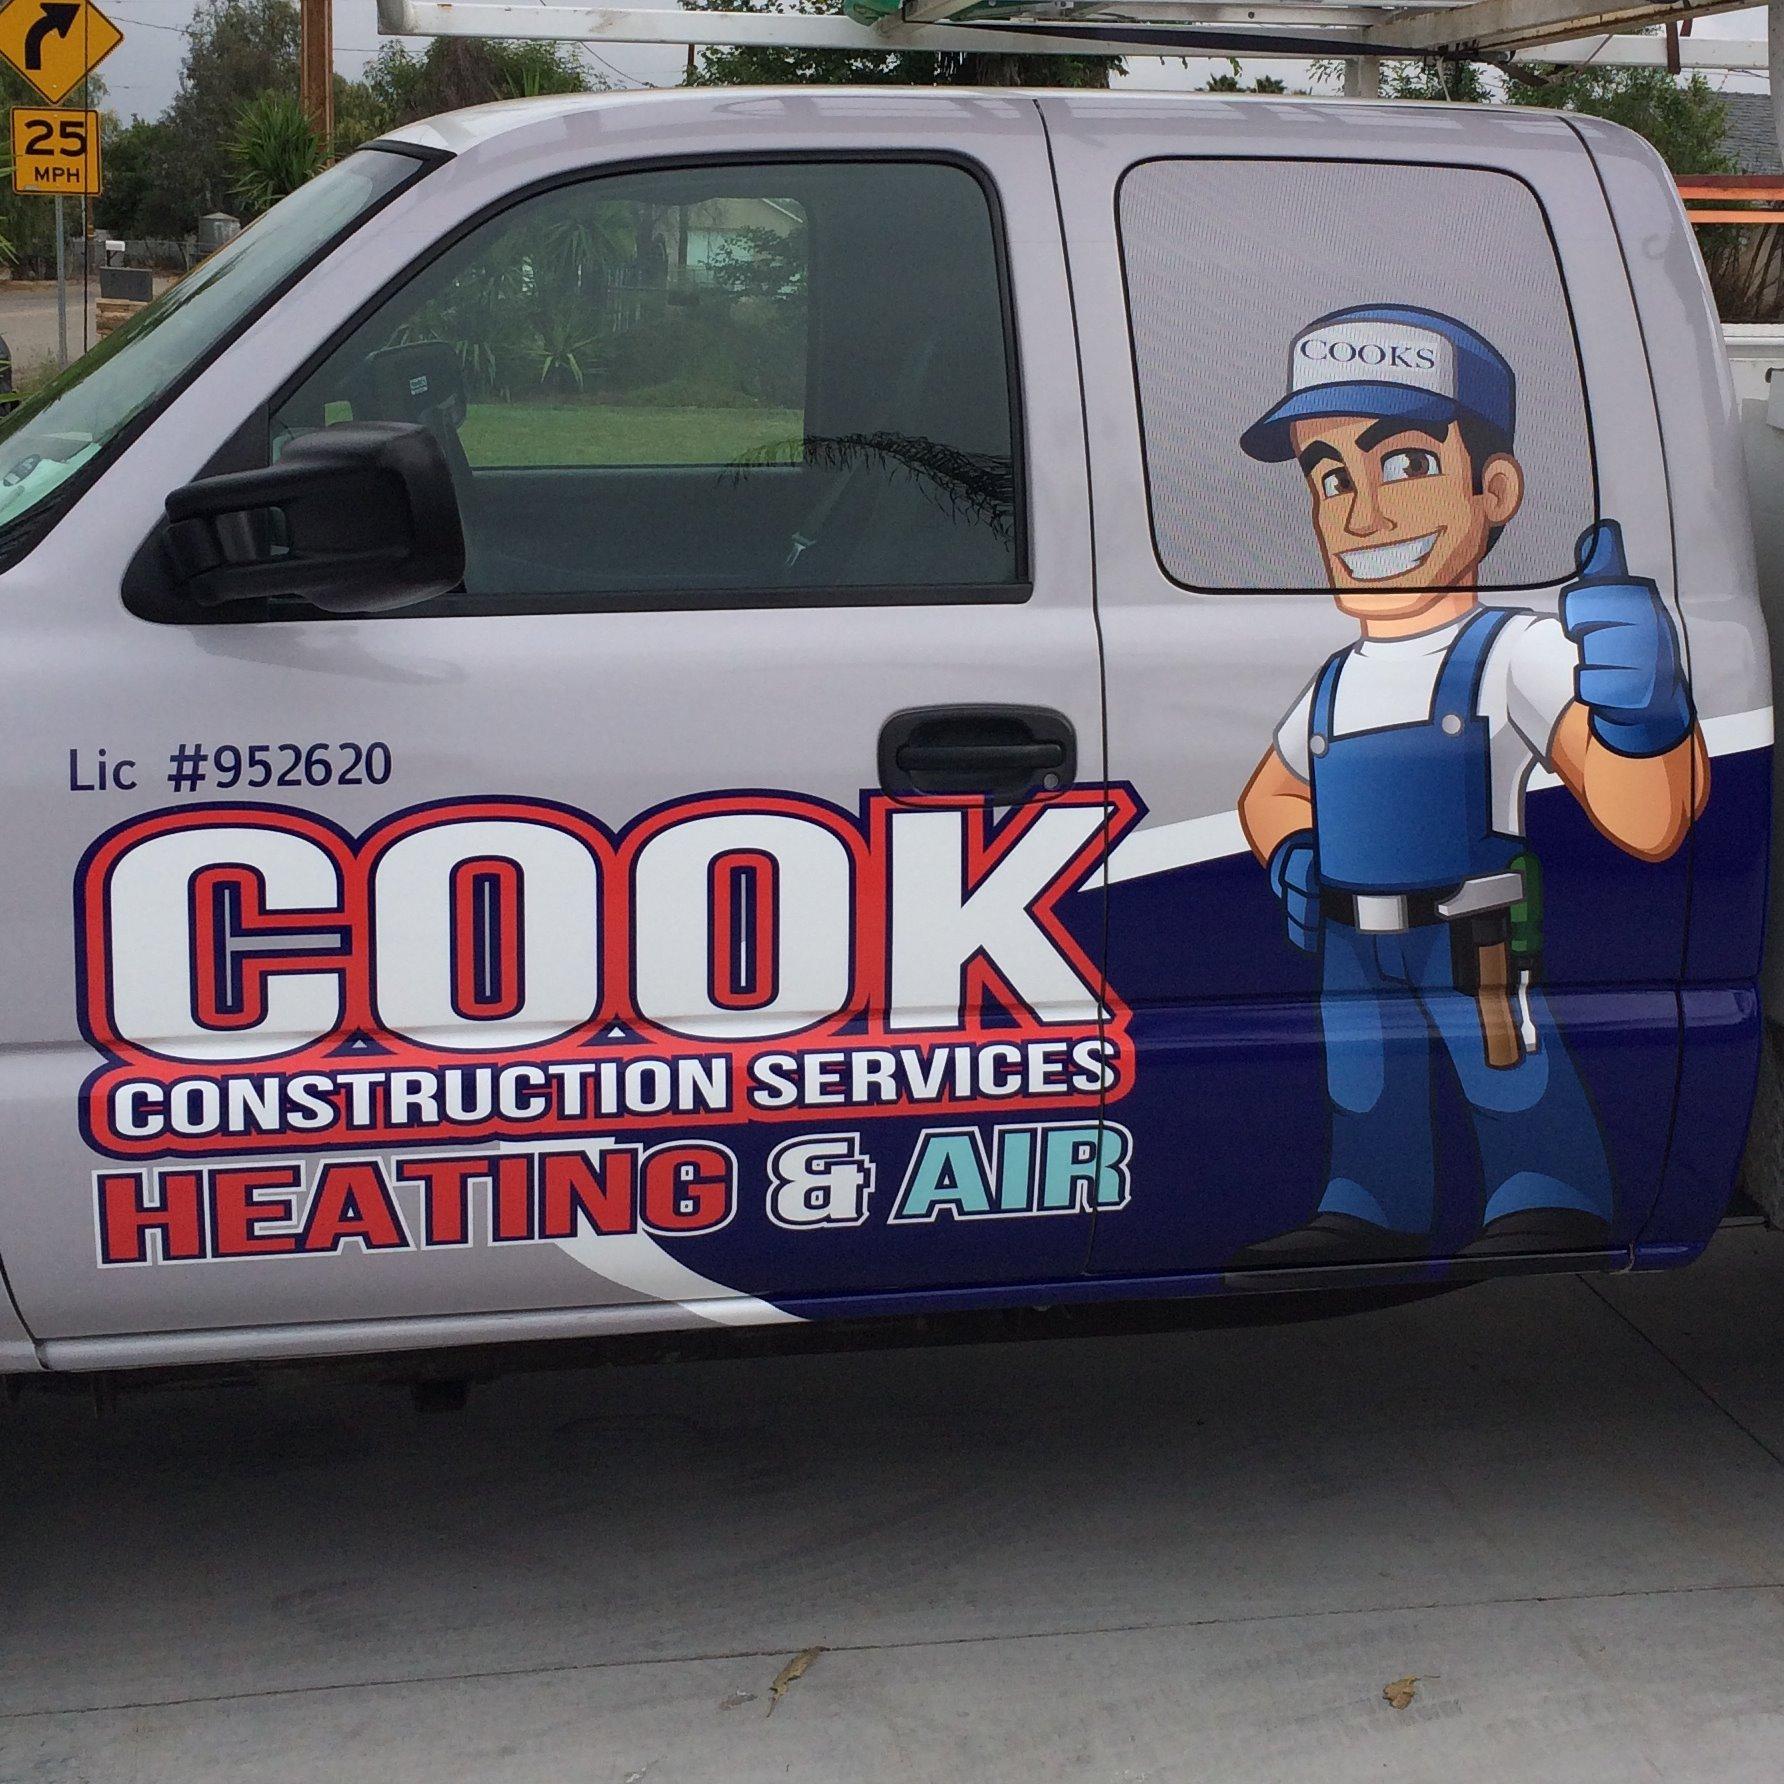 Cook Construction Services Heating and Air Conditioning Coupons near me in Riverside, CA 92508 ...